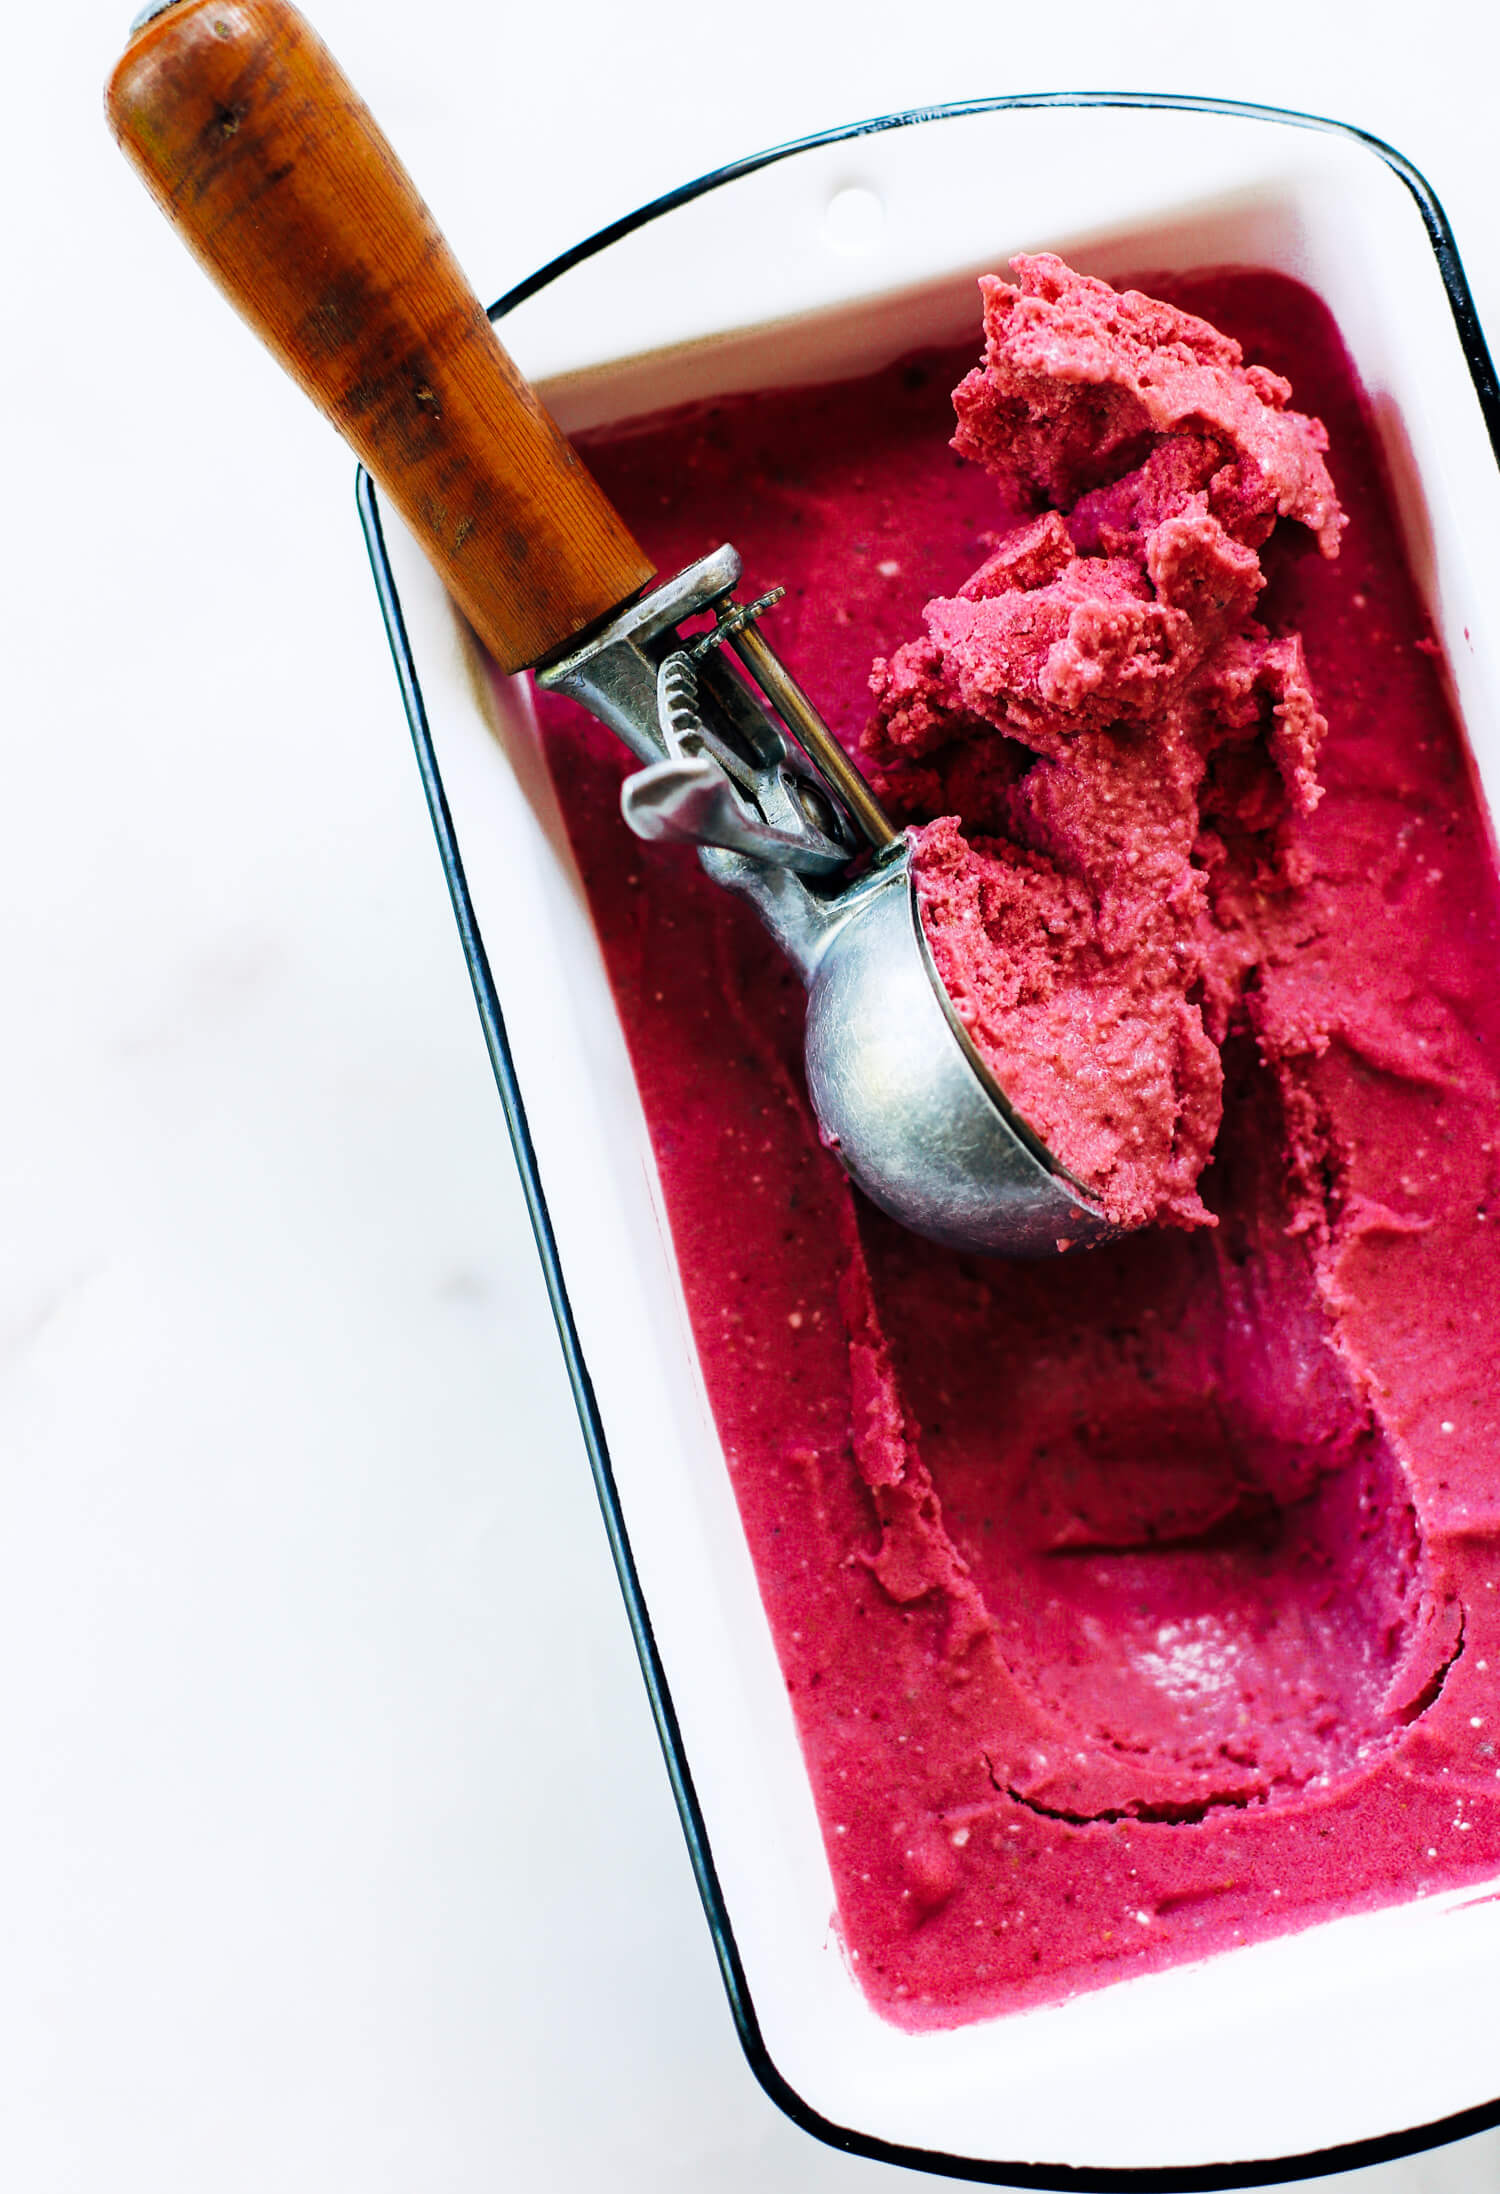 Three minute strawberry ice-cream. 43 calories per scoop! No bananas! Made instantly in a blender. No churn, no machine, no freezing. No waiting! Vegan and paleo. It’s practically lunch!